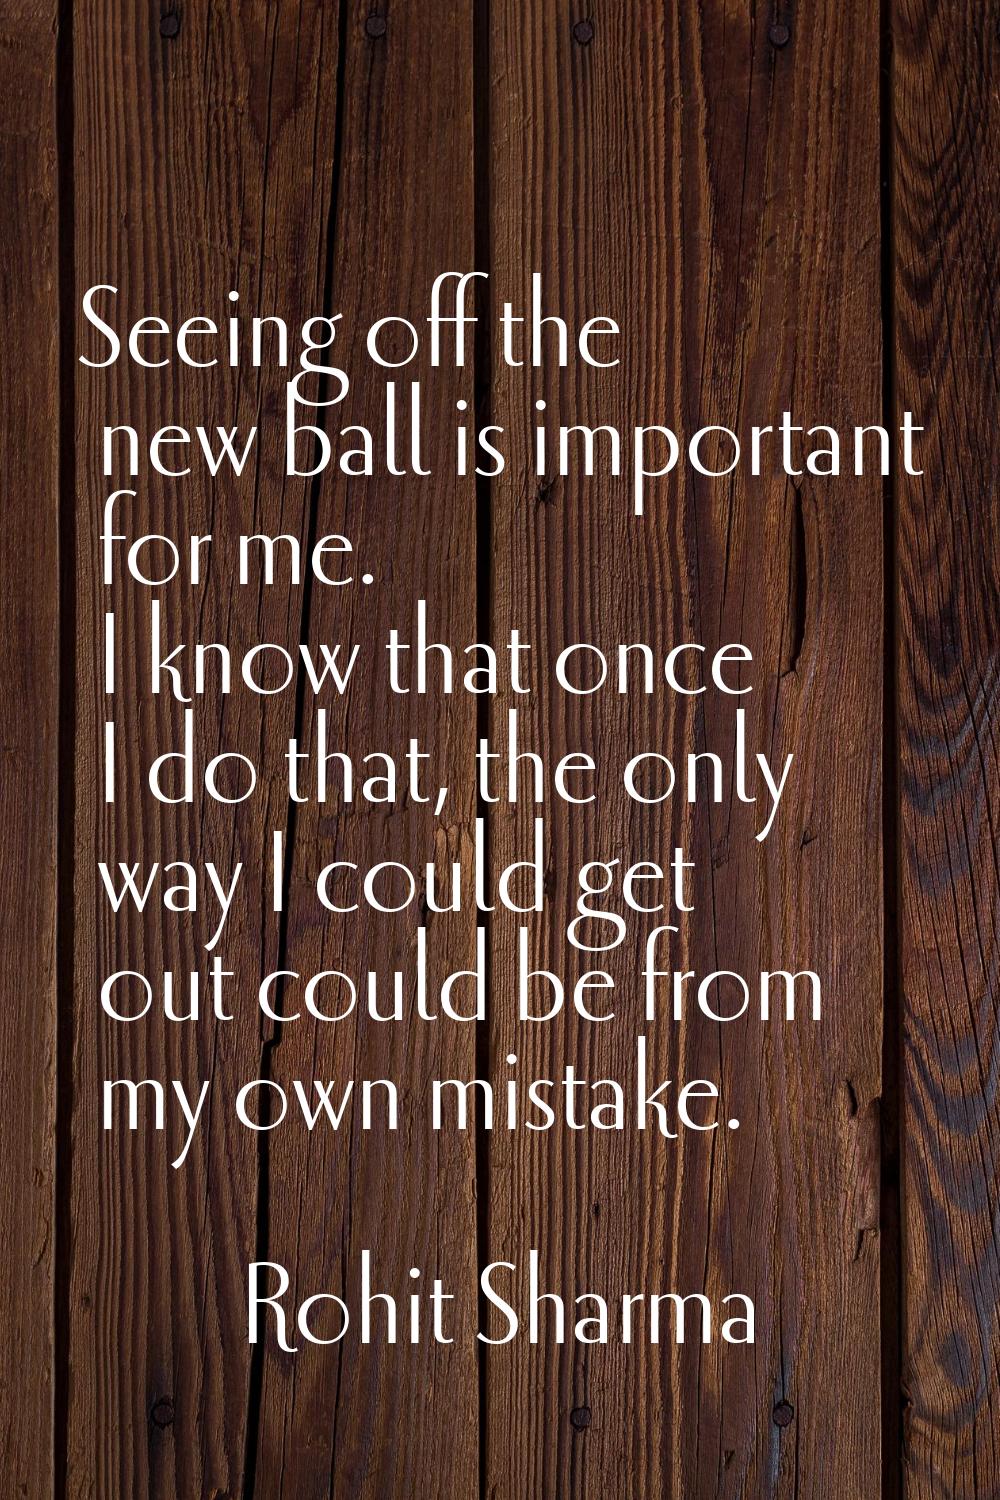 Seeing off the new ball is important for me. I know that once I do that, the only way I could get o